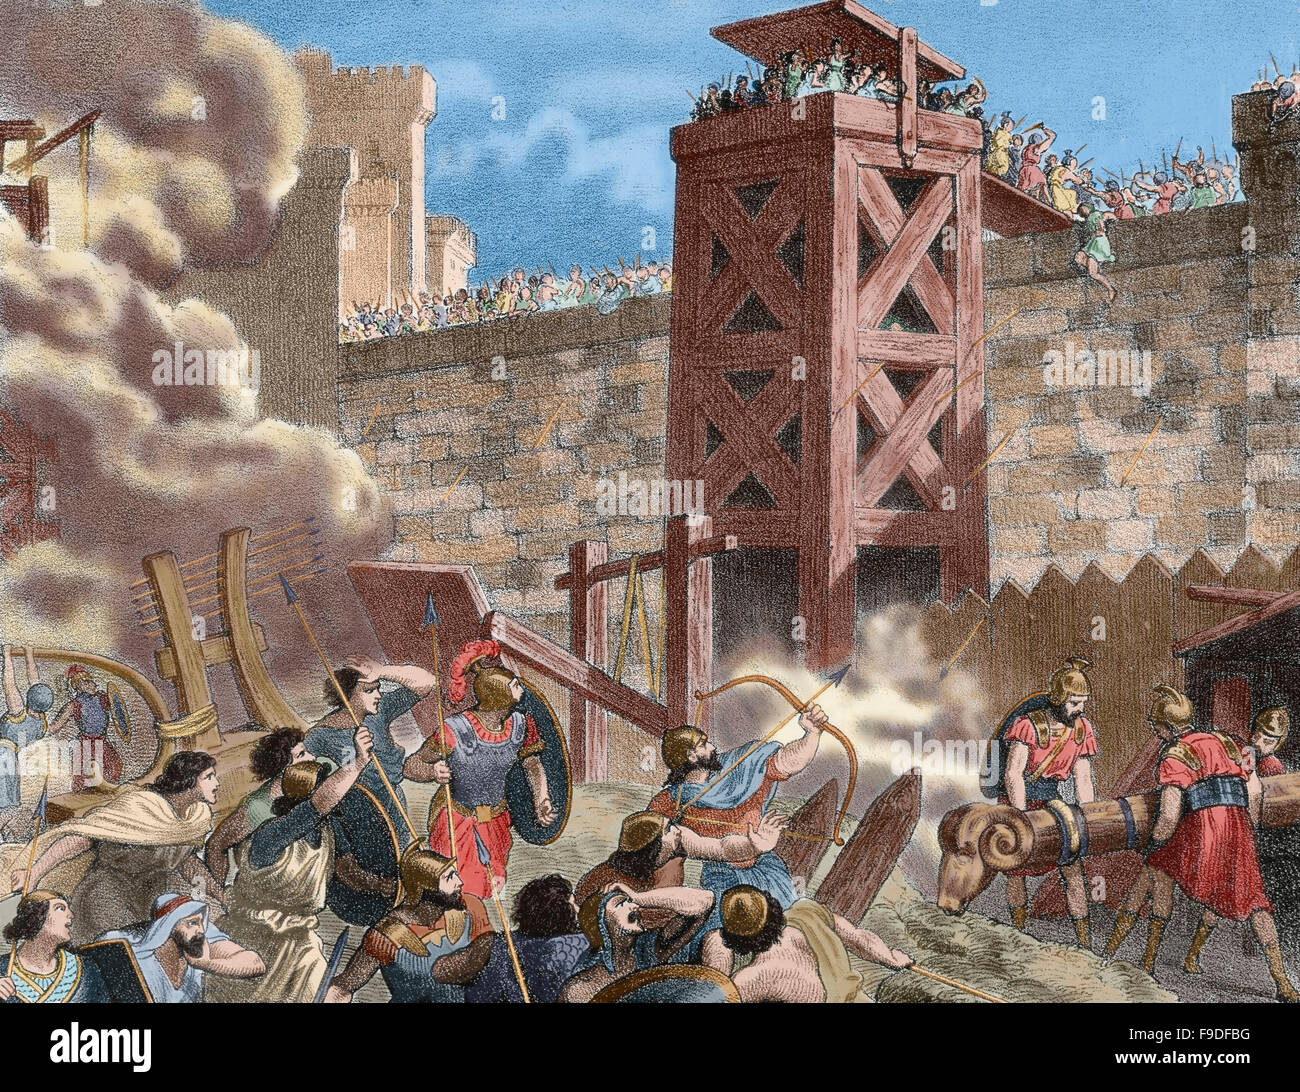 The Siege of Saguntum (219 B.C.). The battle took place between the Carthaginians, leaded by Hannibal Barca (247-183 B.C.) and the Saguntines at the Roman Hill town of Saguntum. This battle triggered  the Second Punic War (218-201 B.C.). Colored engraving. Stock Photo